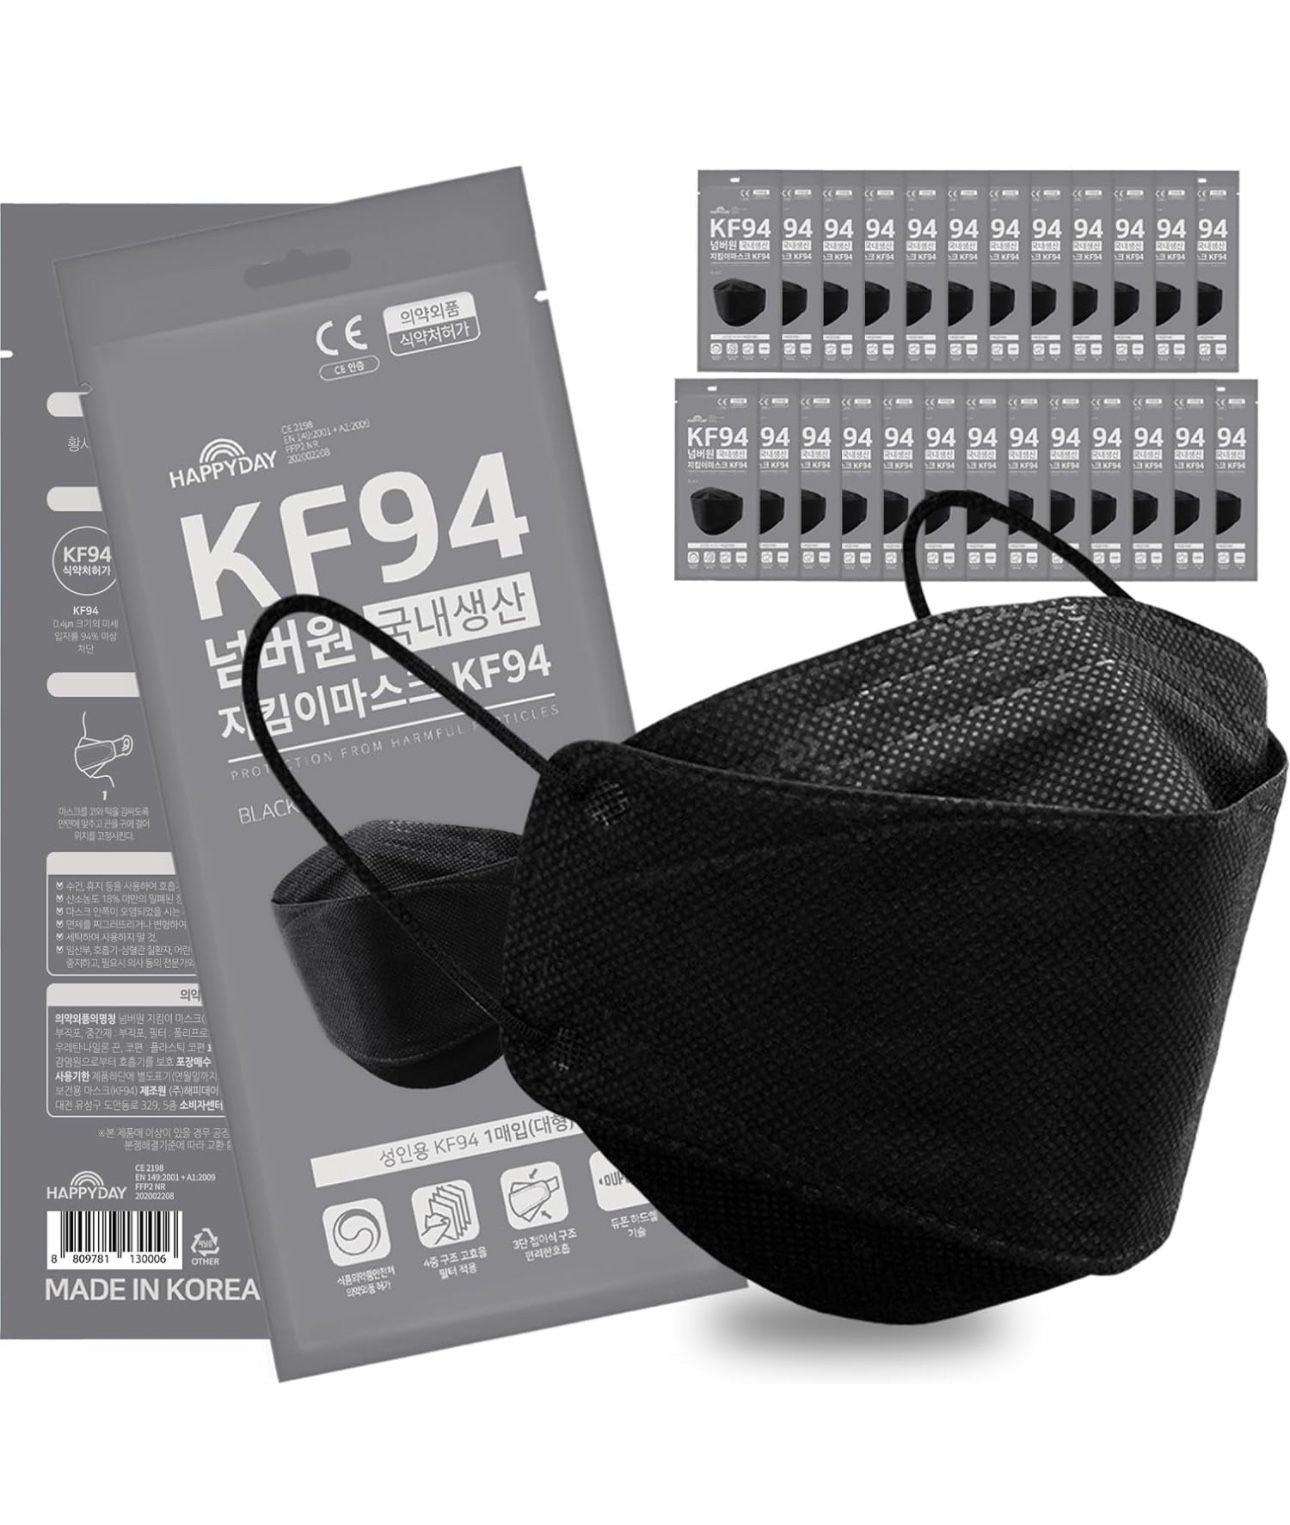 HAPPYDAY , 19 Packs , Made in KOREA Premium KF94 Micro Dust Protection Individually Packaged Black Face Mask Large